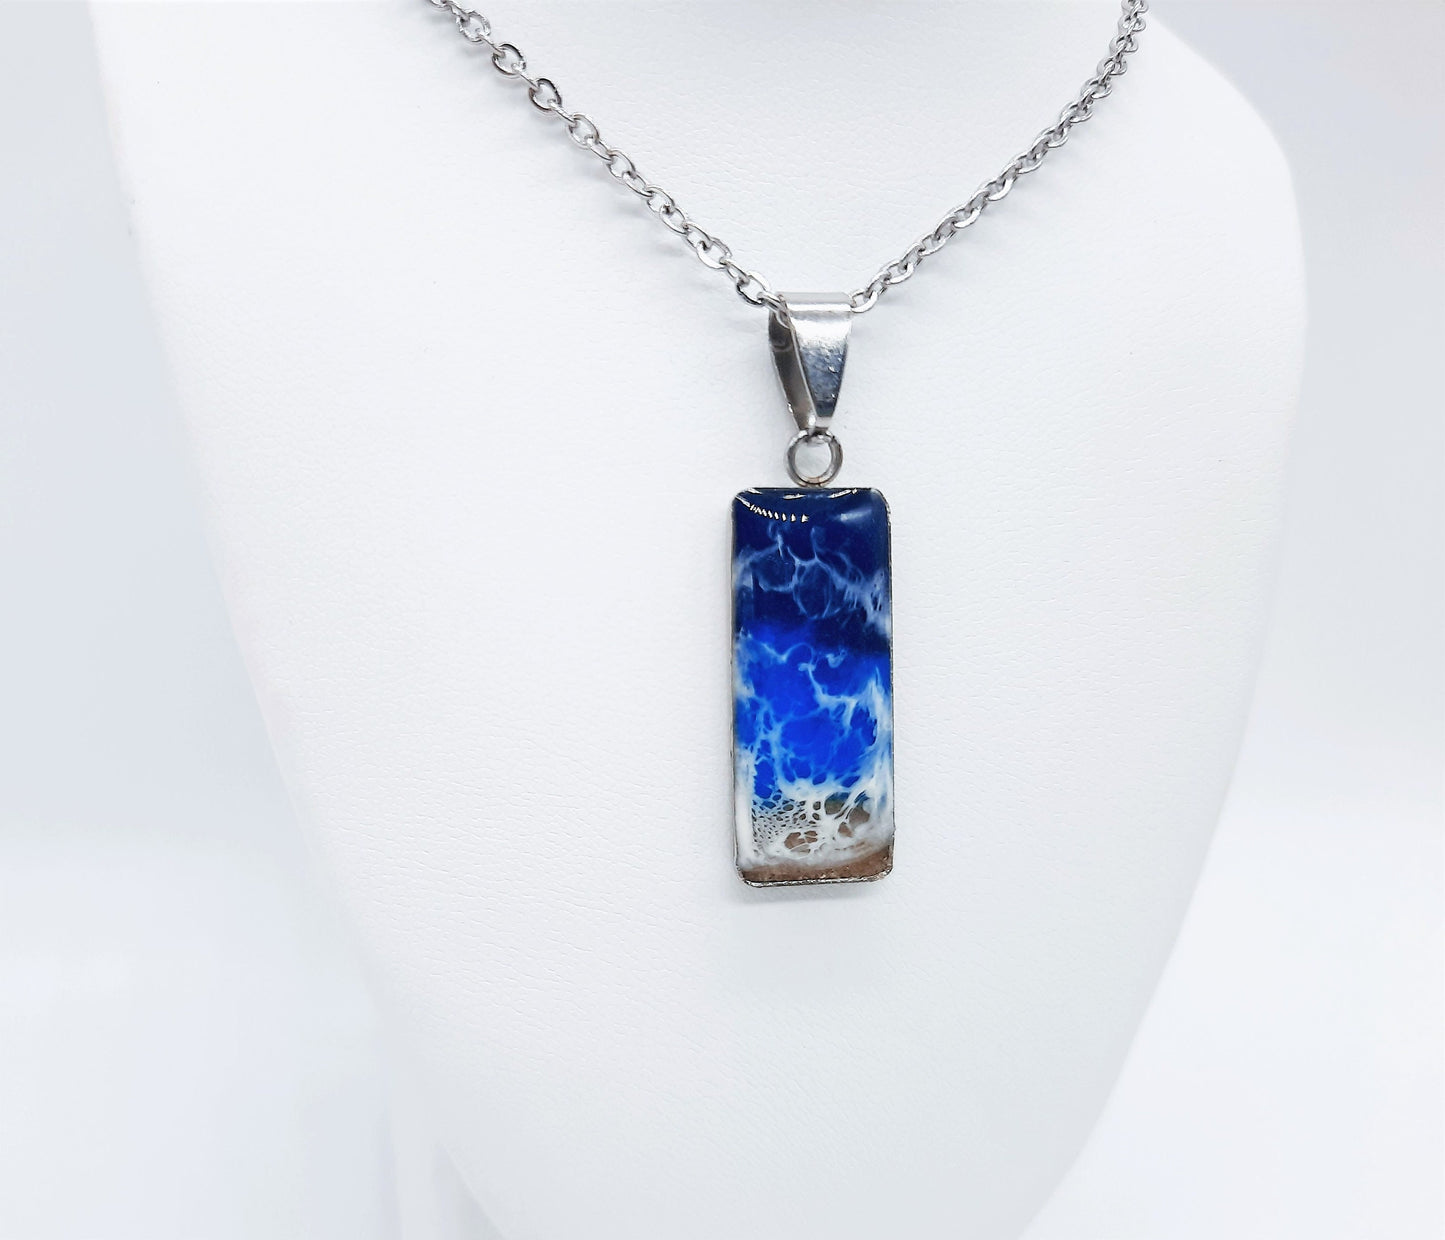 Resin Waves Rectangle Shaped Ocean Pendant / Beach Scene Necklace, Handmade Made with Resin & Real Sand - One of a Kind - Not a Photograph!